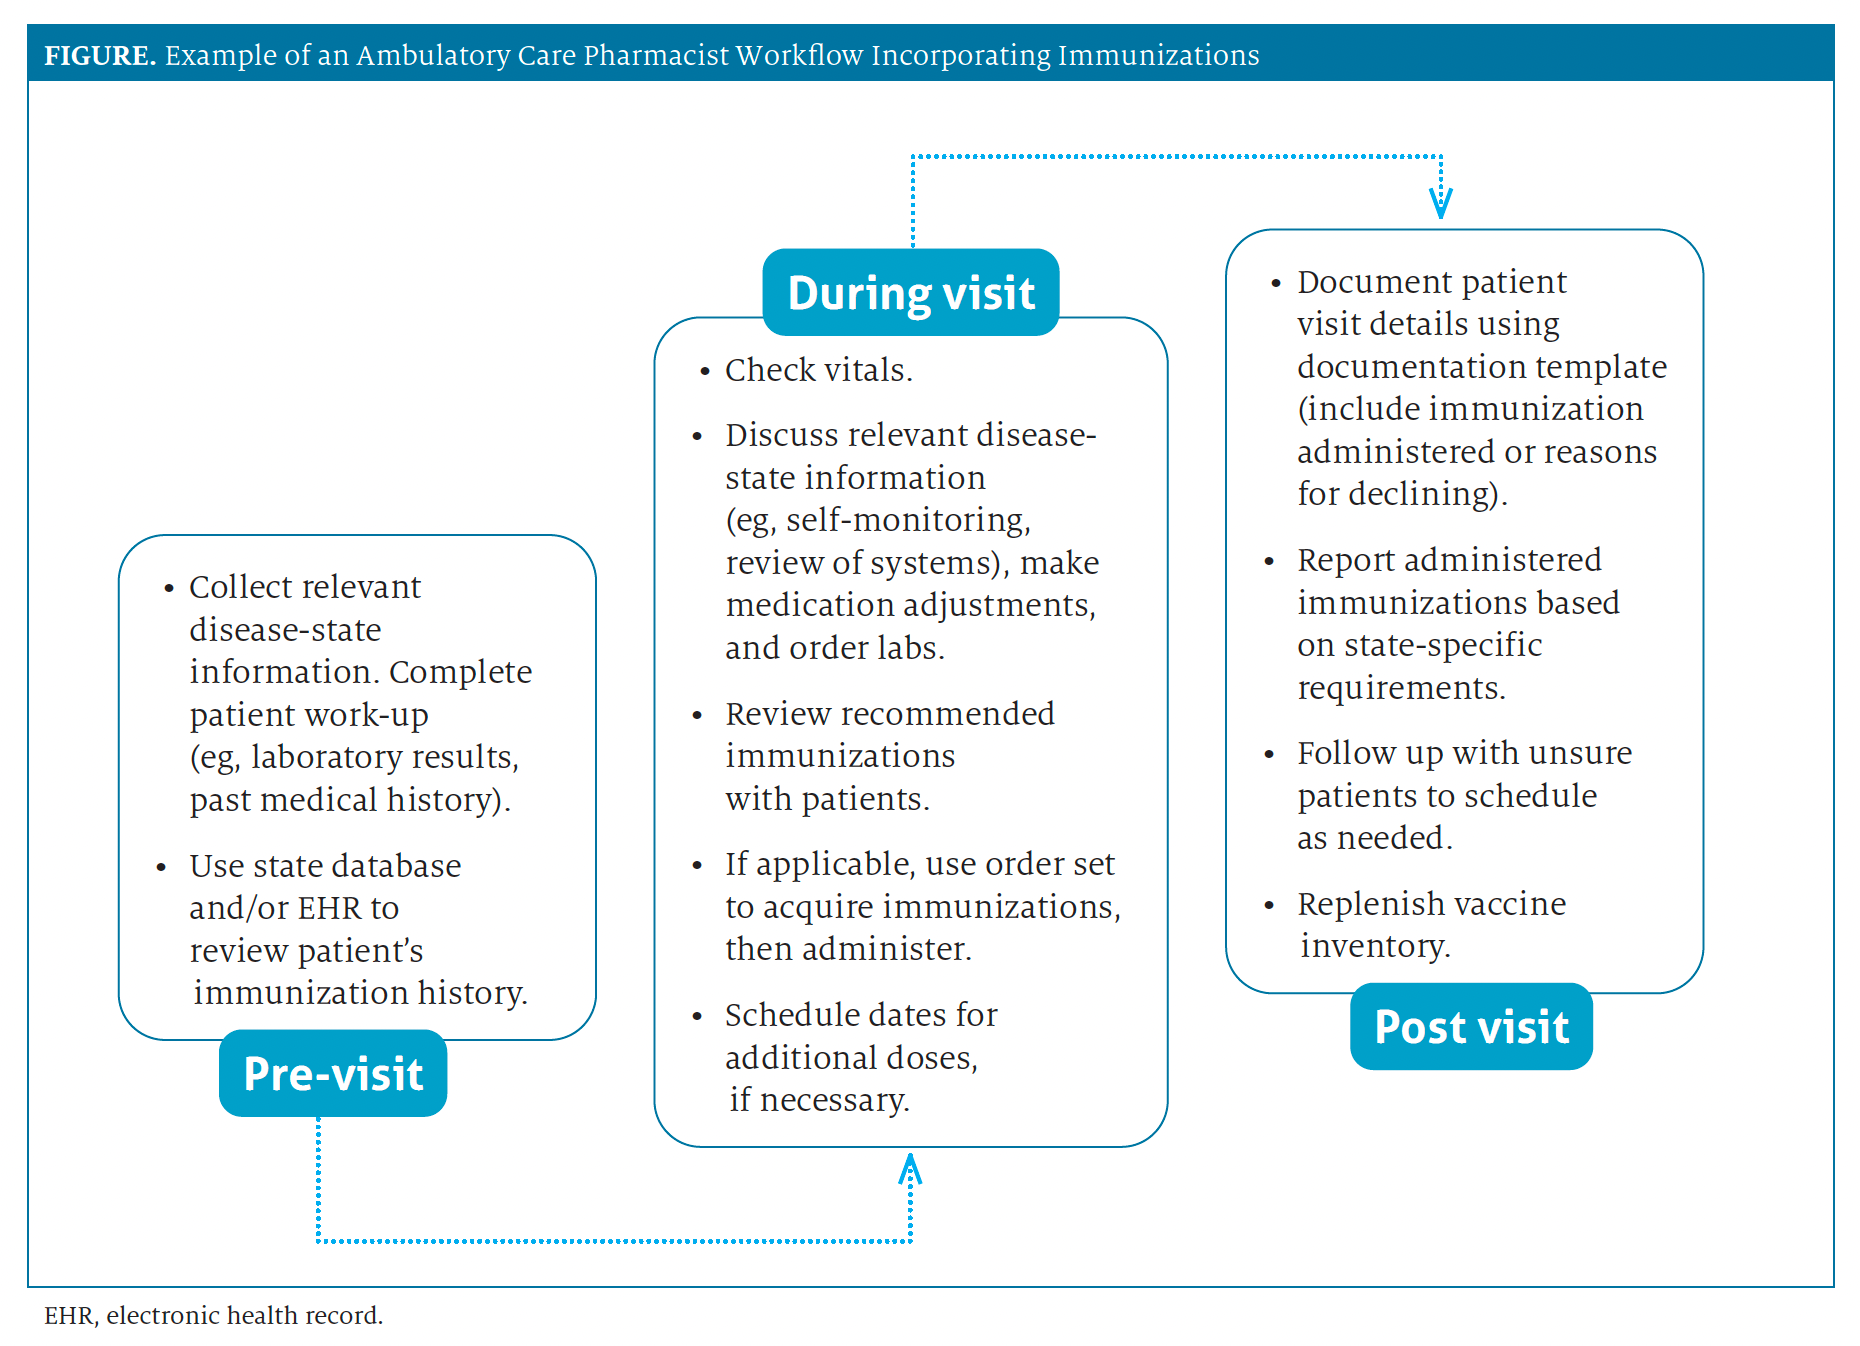 Example of an Ambulatory Care Pharmacist Workflow Incorporating Immunizations